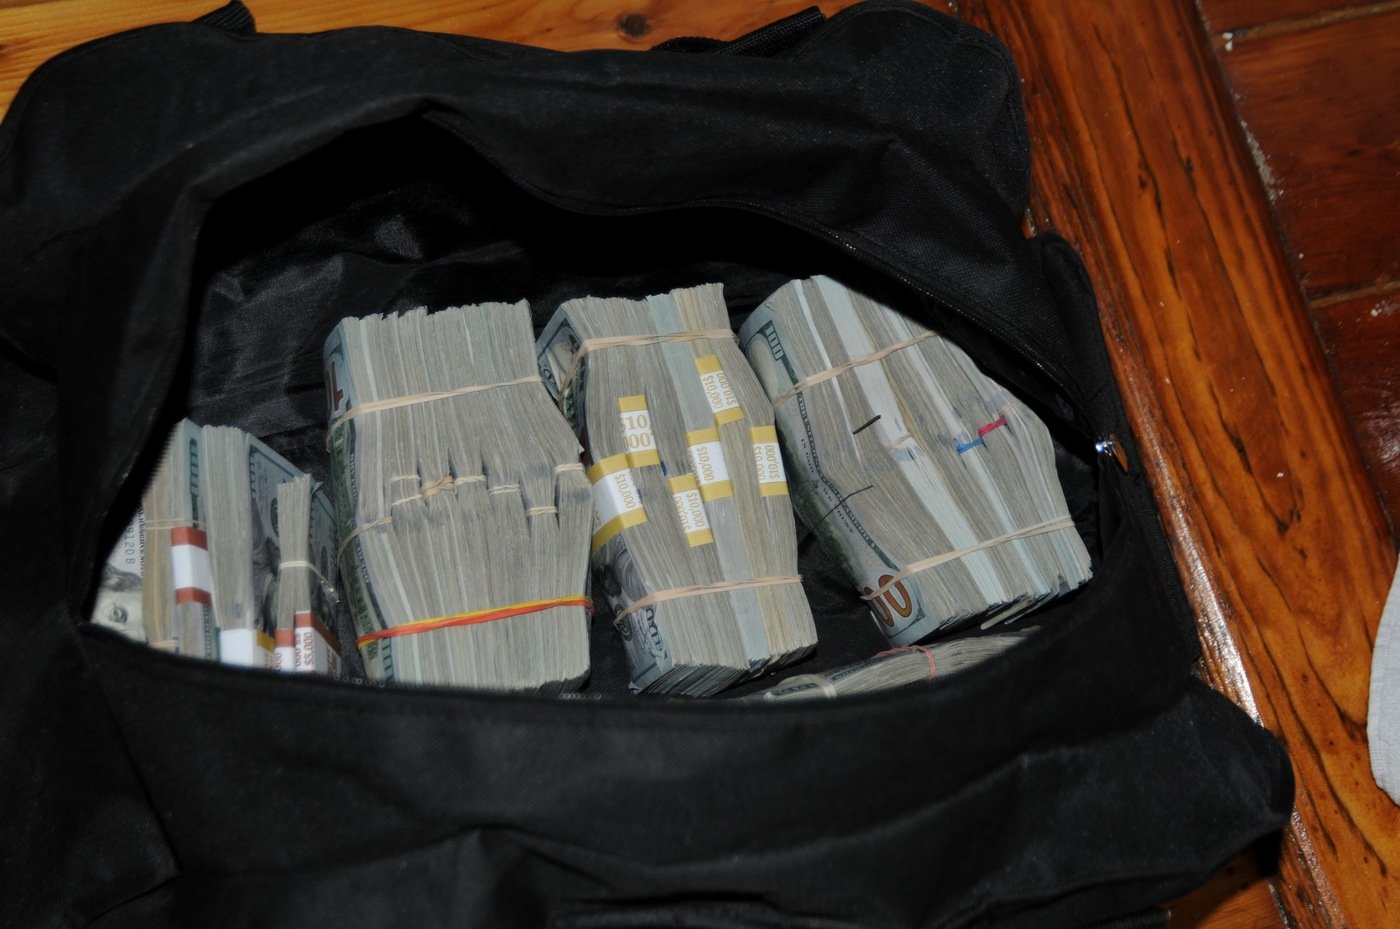 Cash seized in Joint Criminal Opioid and Darknet Enforcement (JCODE) operation in 2021.